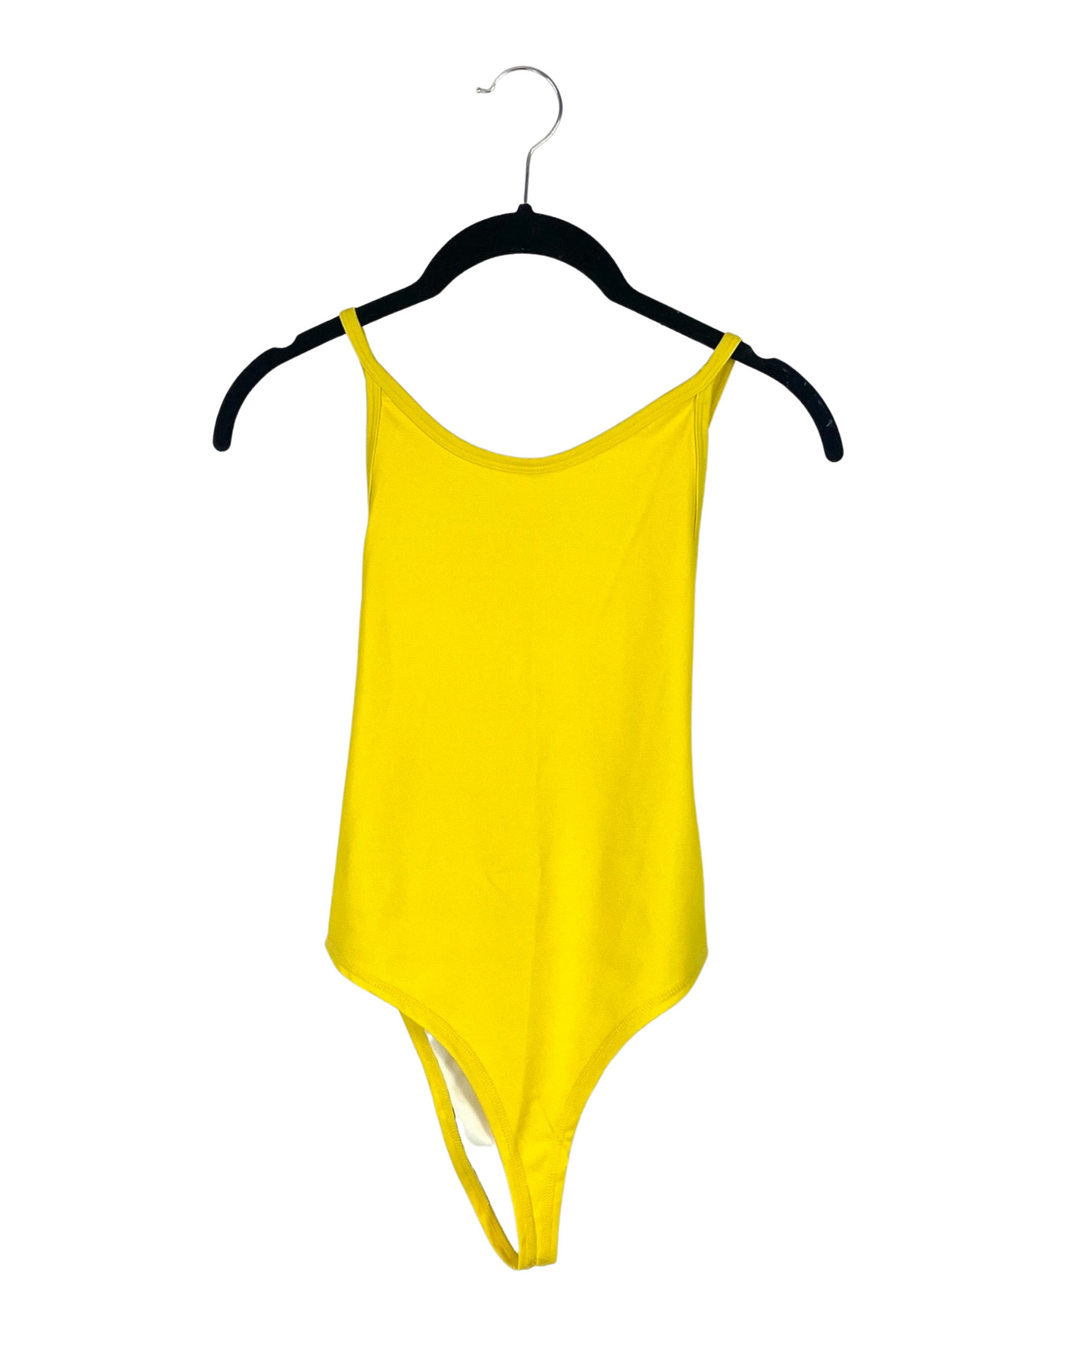 Yellow Bodysuit - Size 00/0 and 0/2